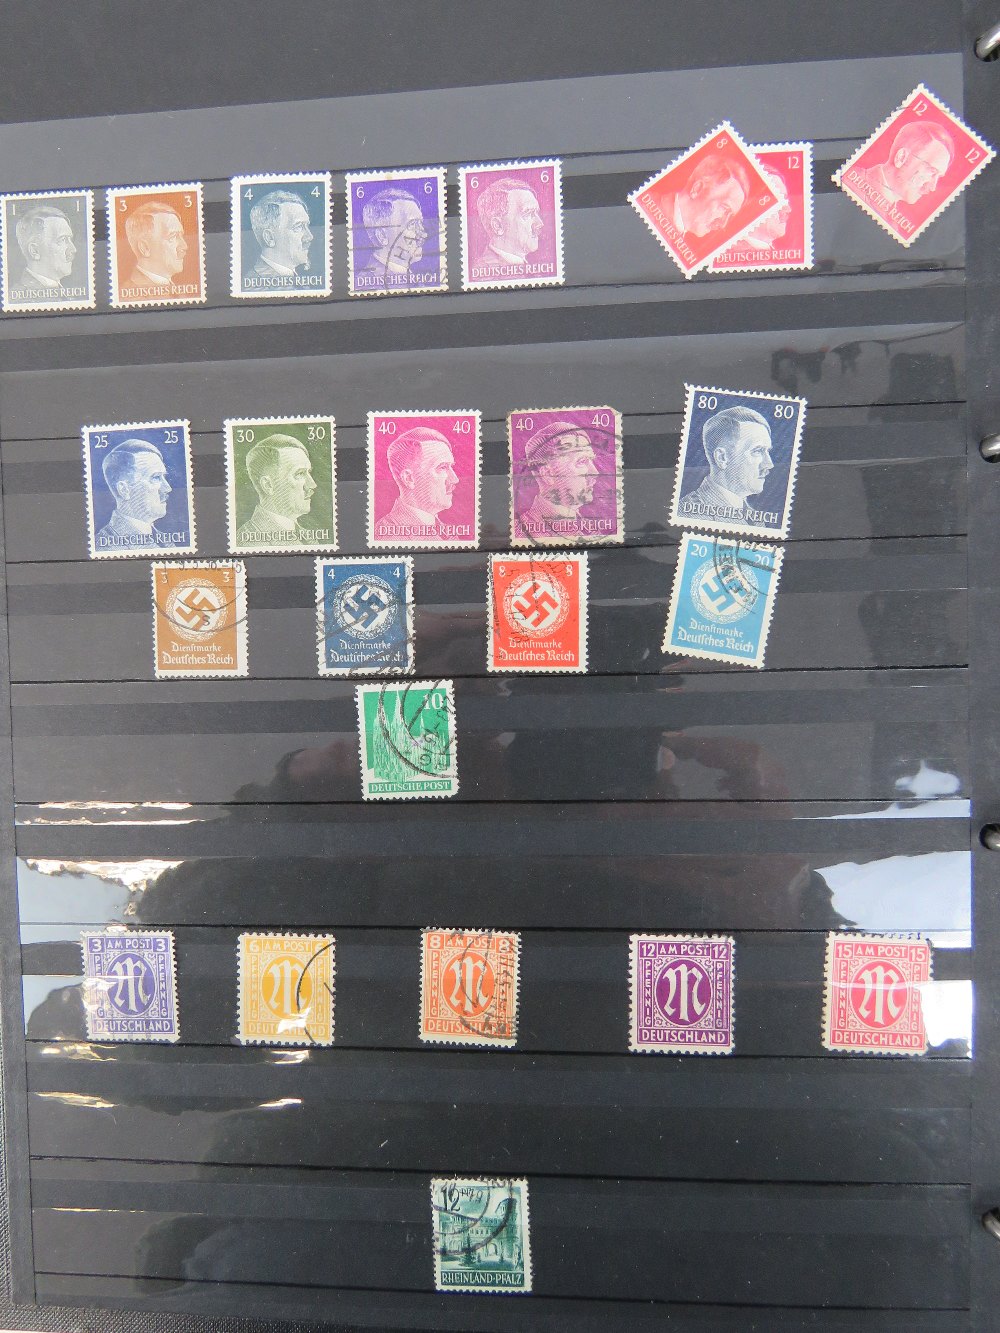 Queen Elizabeth II Royal commemorative stamps and a collection of various British and World stamps. - Image 3 of 4